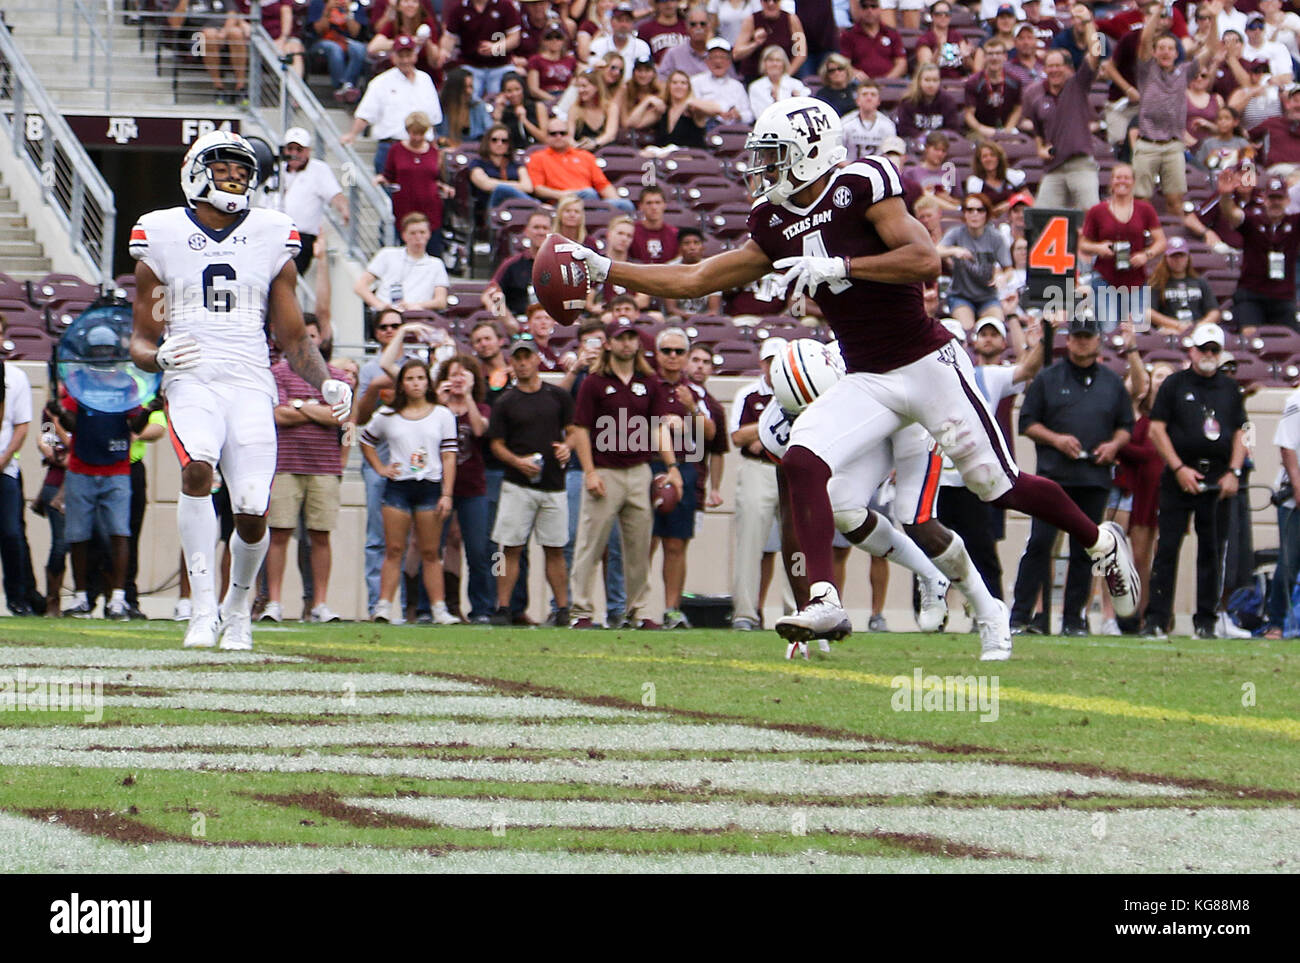 November 4, 2017: Auburn Tigers wide receiver Noah Igbinoghene (4) crosses the goal line for a touchdown in the fourth quarter during the NCAA football game between the Auburn Tigers and the Texas A&M Aggies at Kyle Field in College Station, TX; John Glaser/CSM. Stock Photo